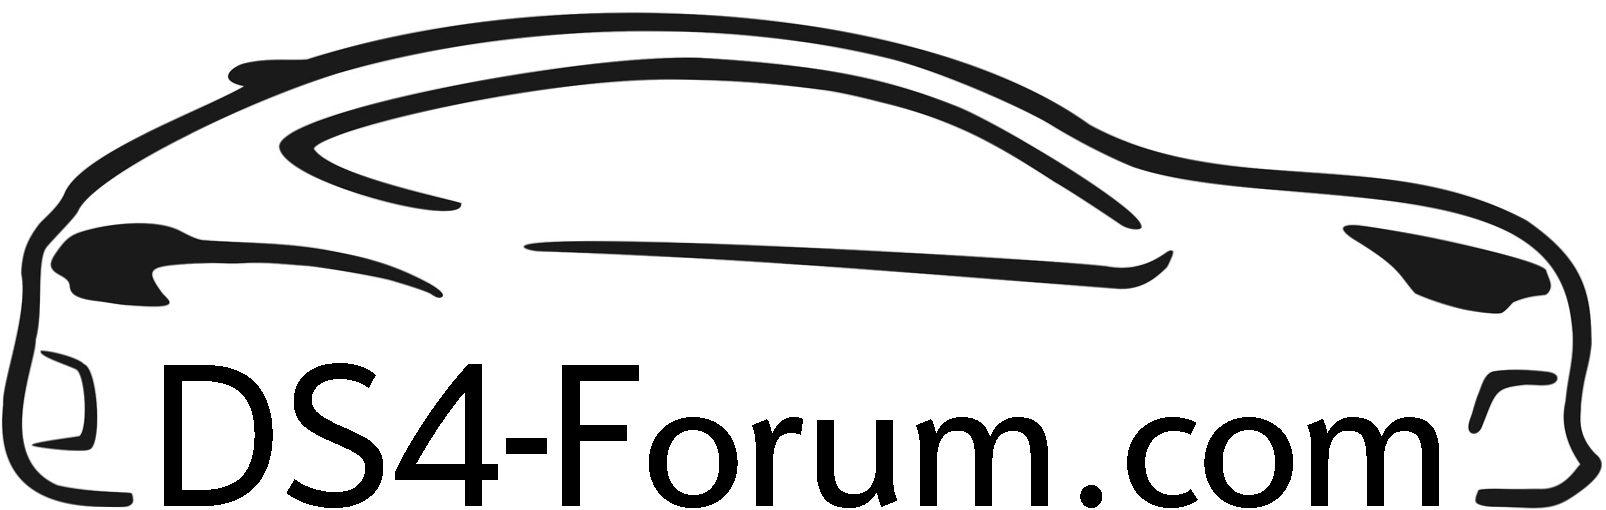 ds4-forum-logo4.png